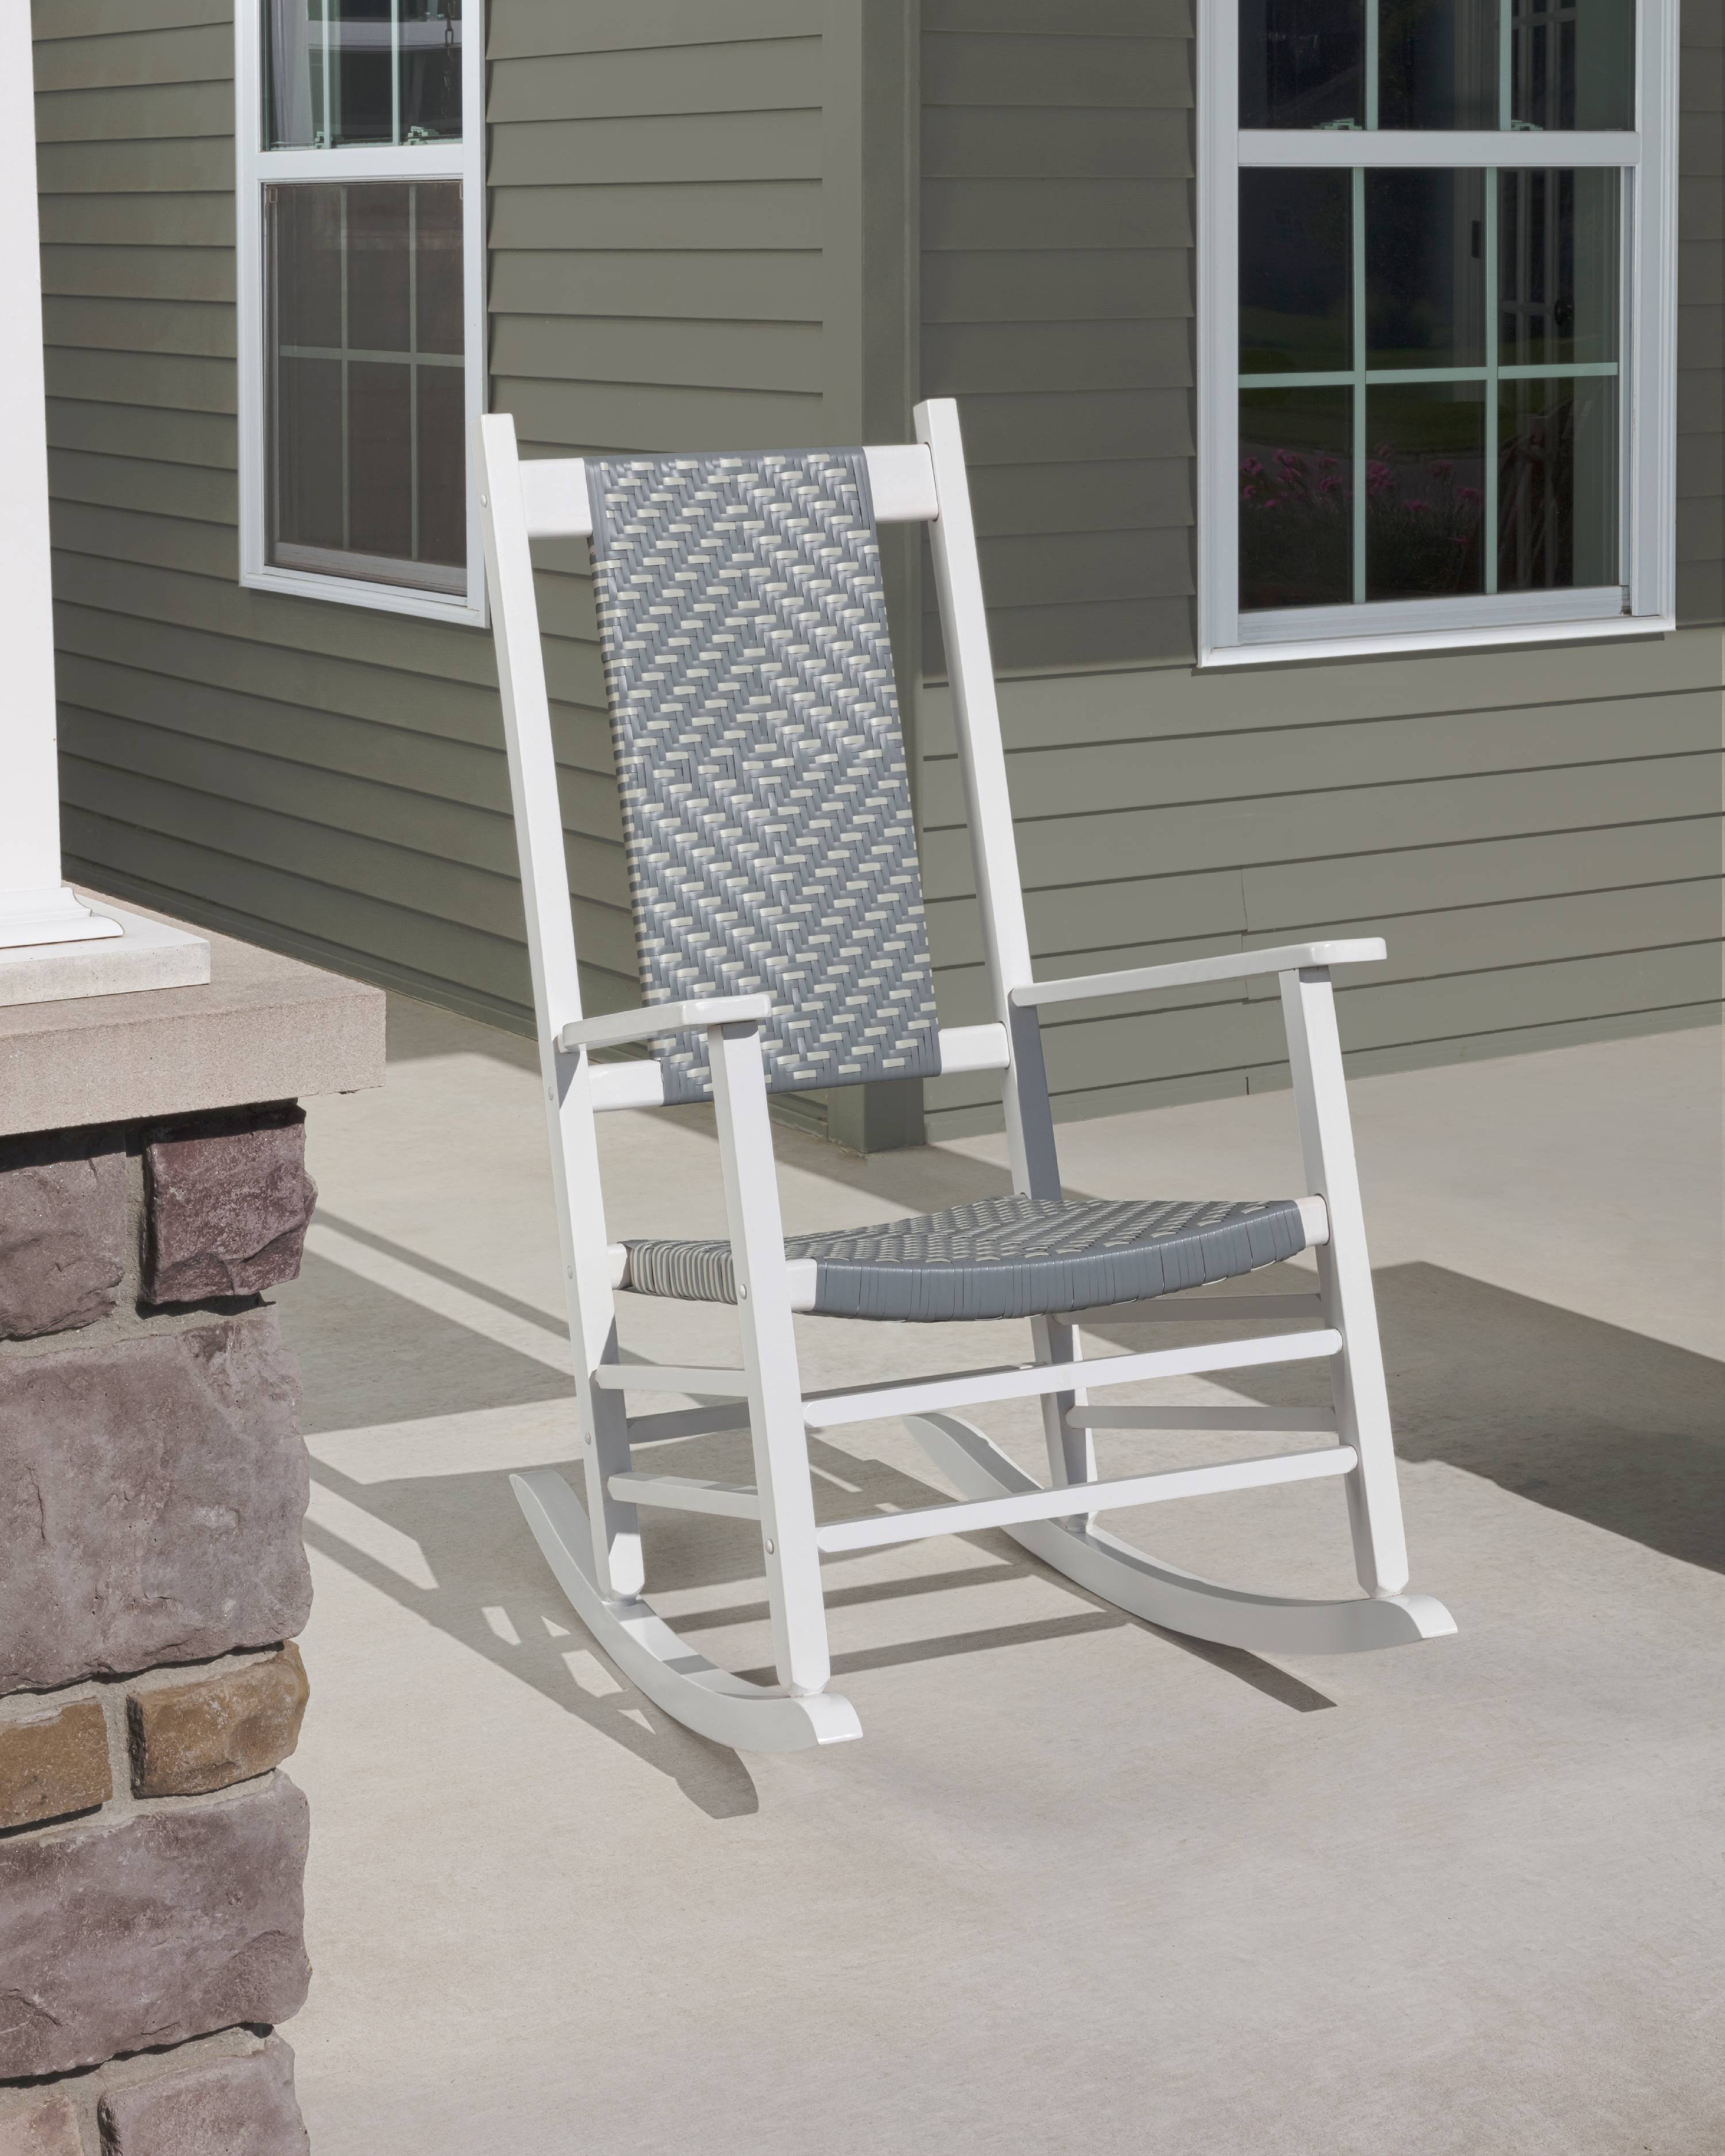 Jack Post Knollwood Rocker With Wicker In White & Gray - image 3 of 3